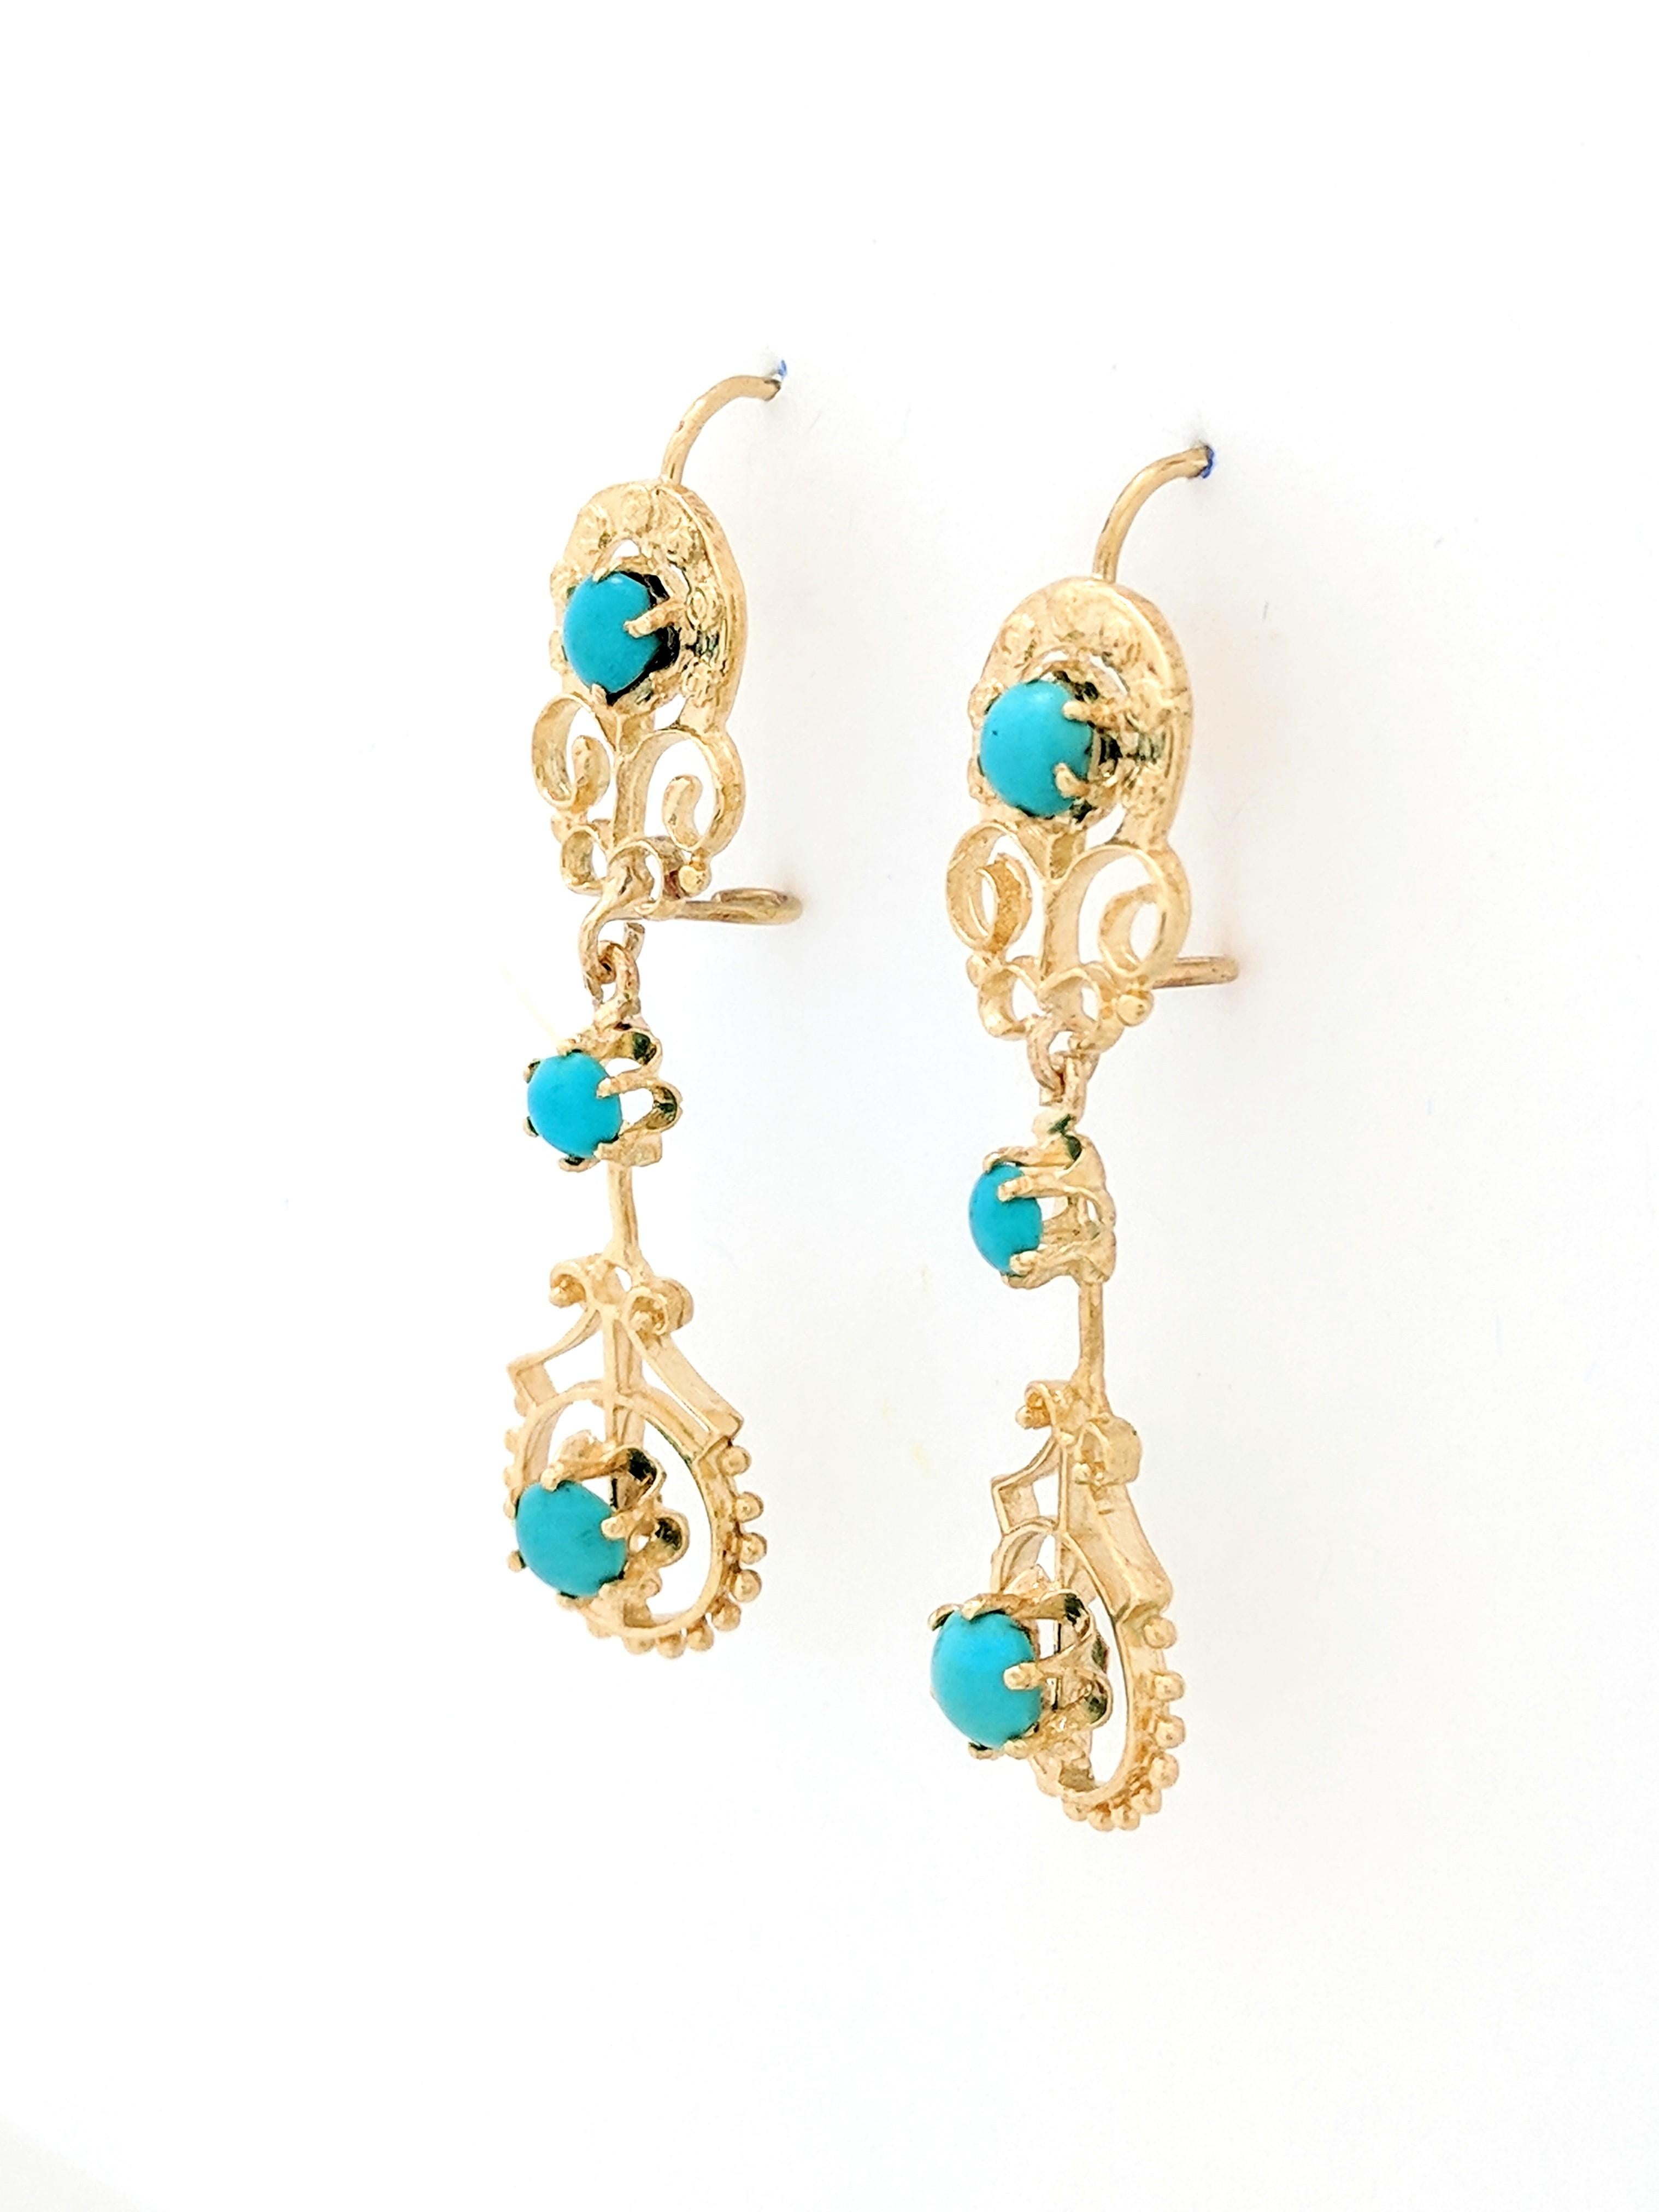 Contemporary 14 Karat Yellow Gold Turquoise Dangle Earrings 6.7 Grams